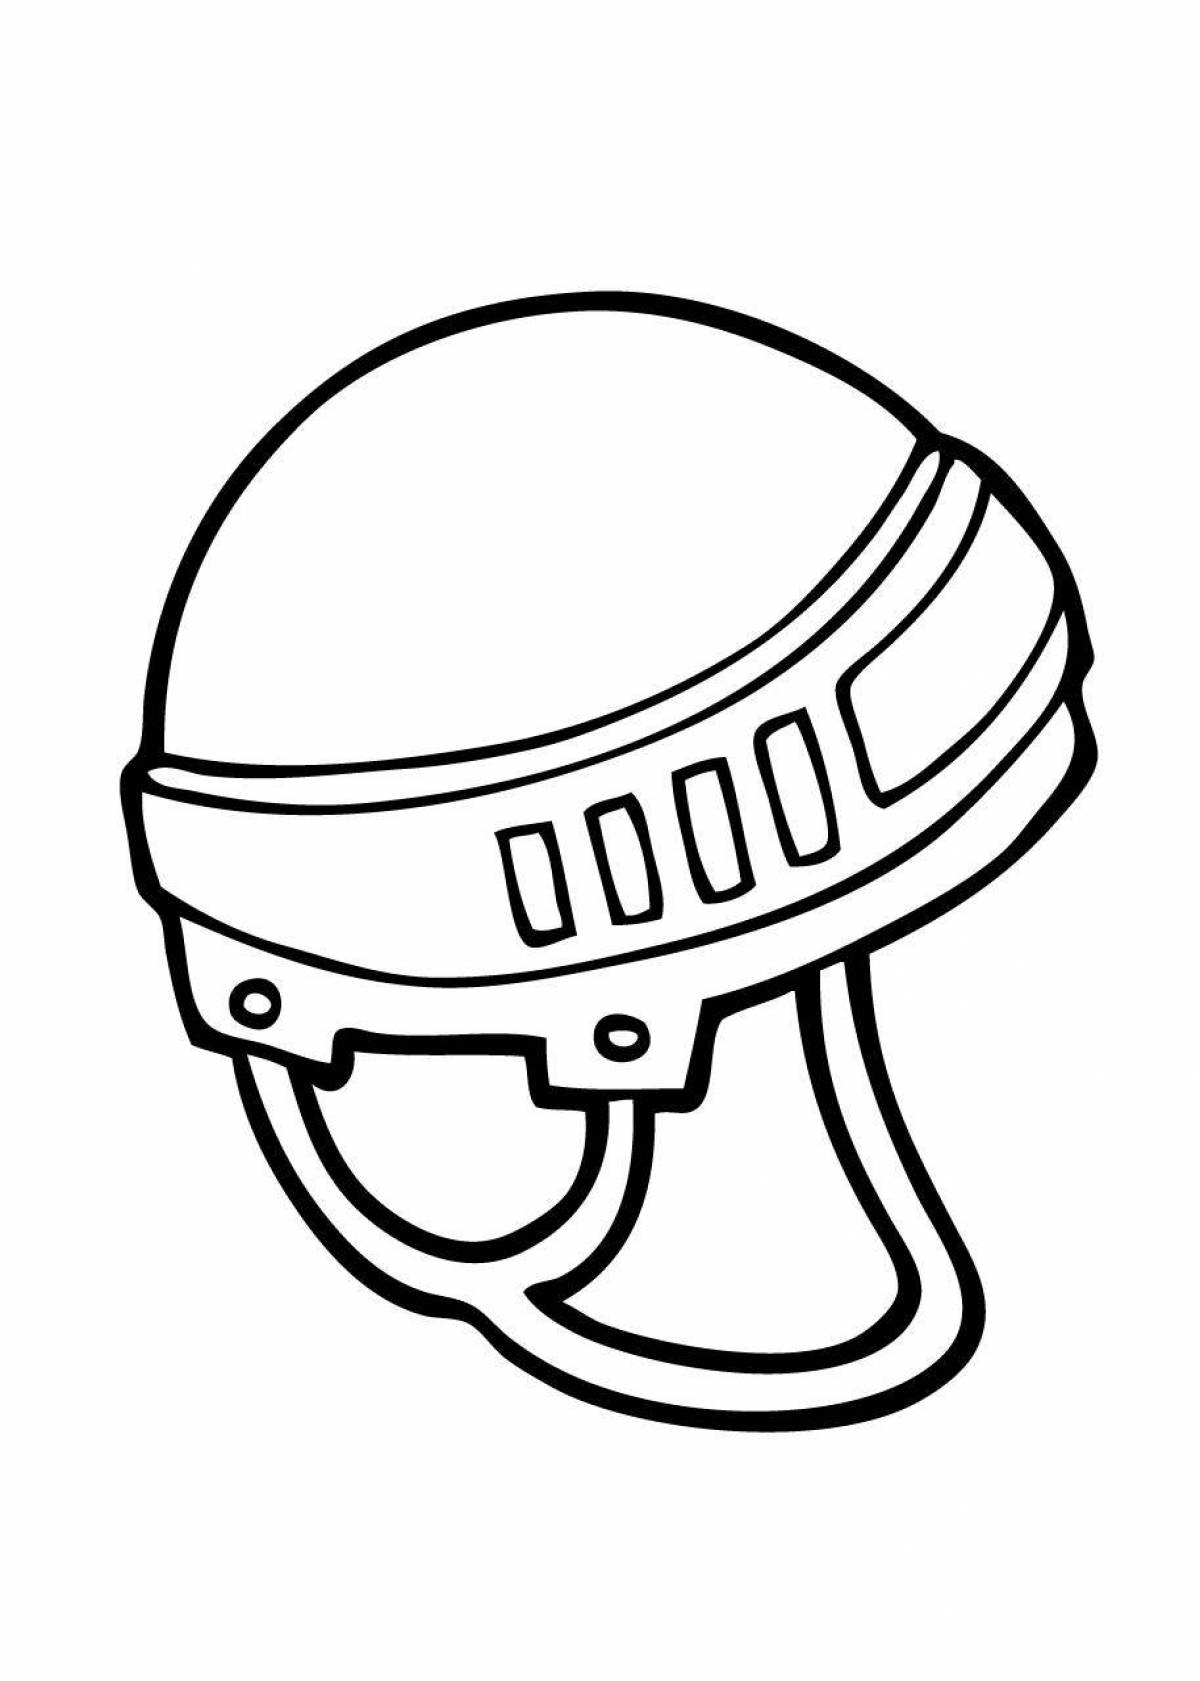 Adorable military helmet coloring book for kids